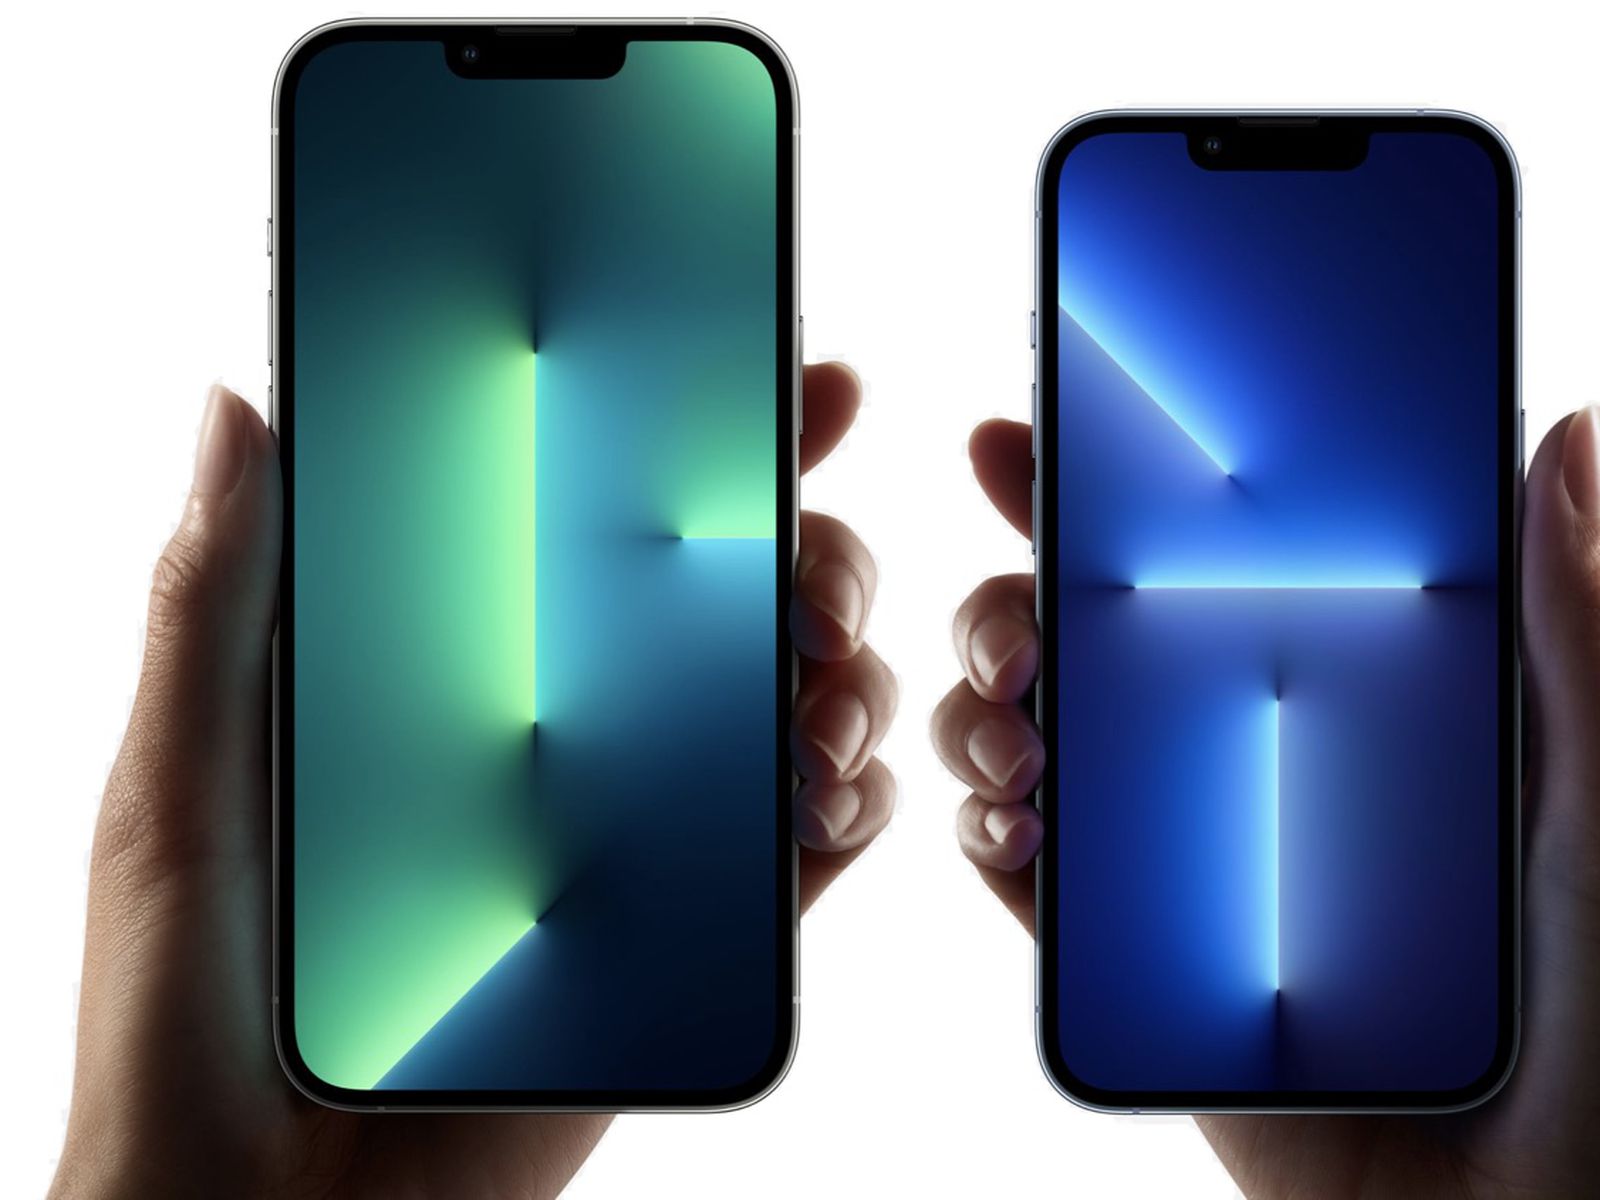 Difference between iphone 13 and 13 pro